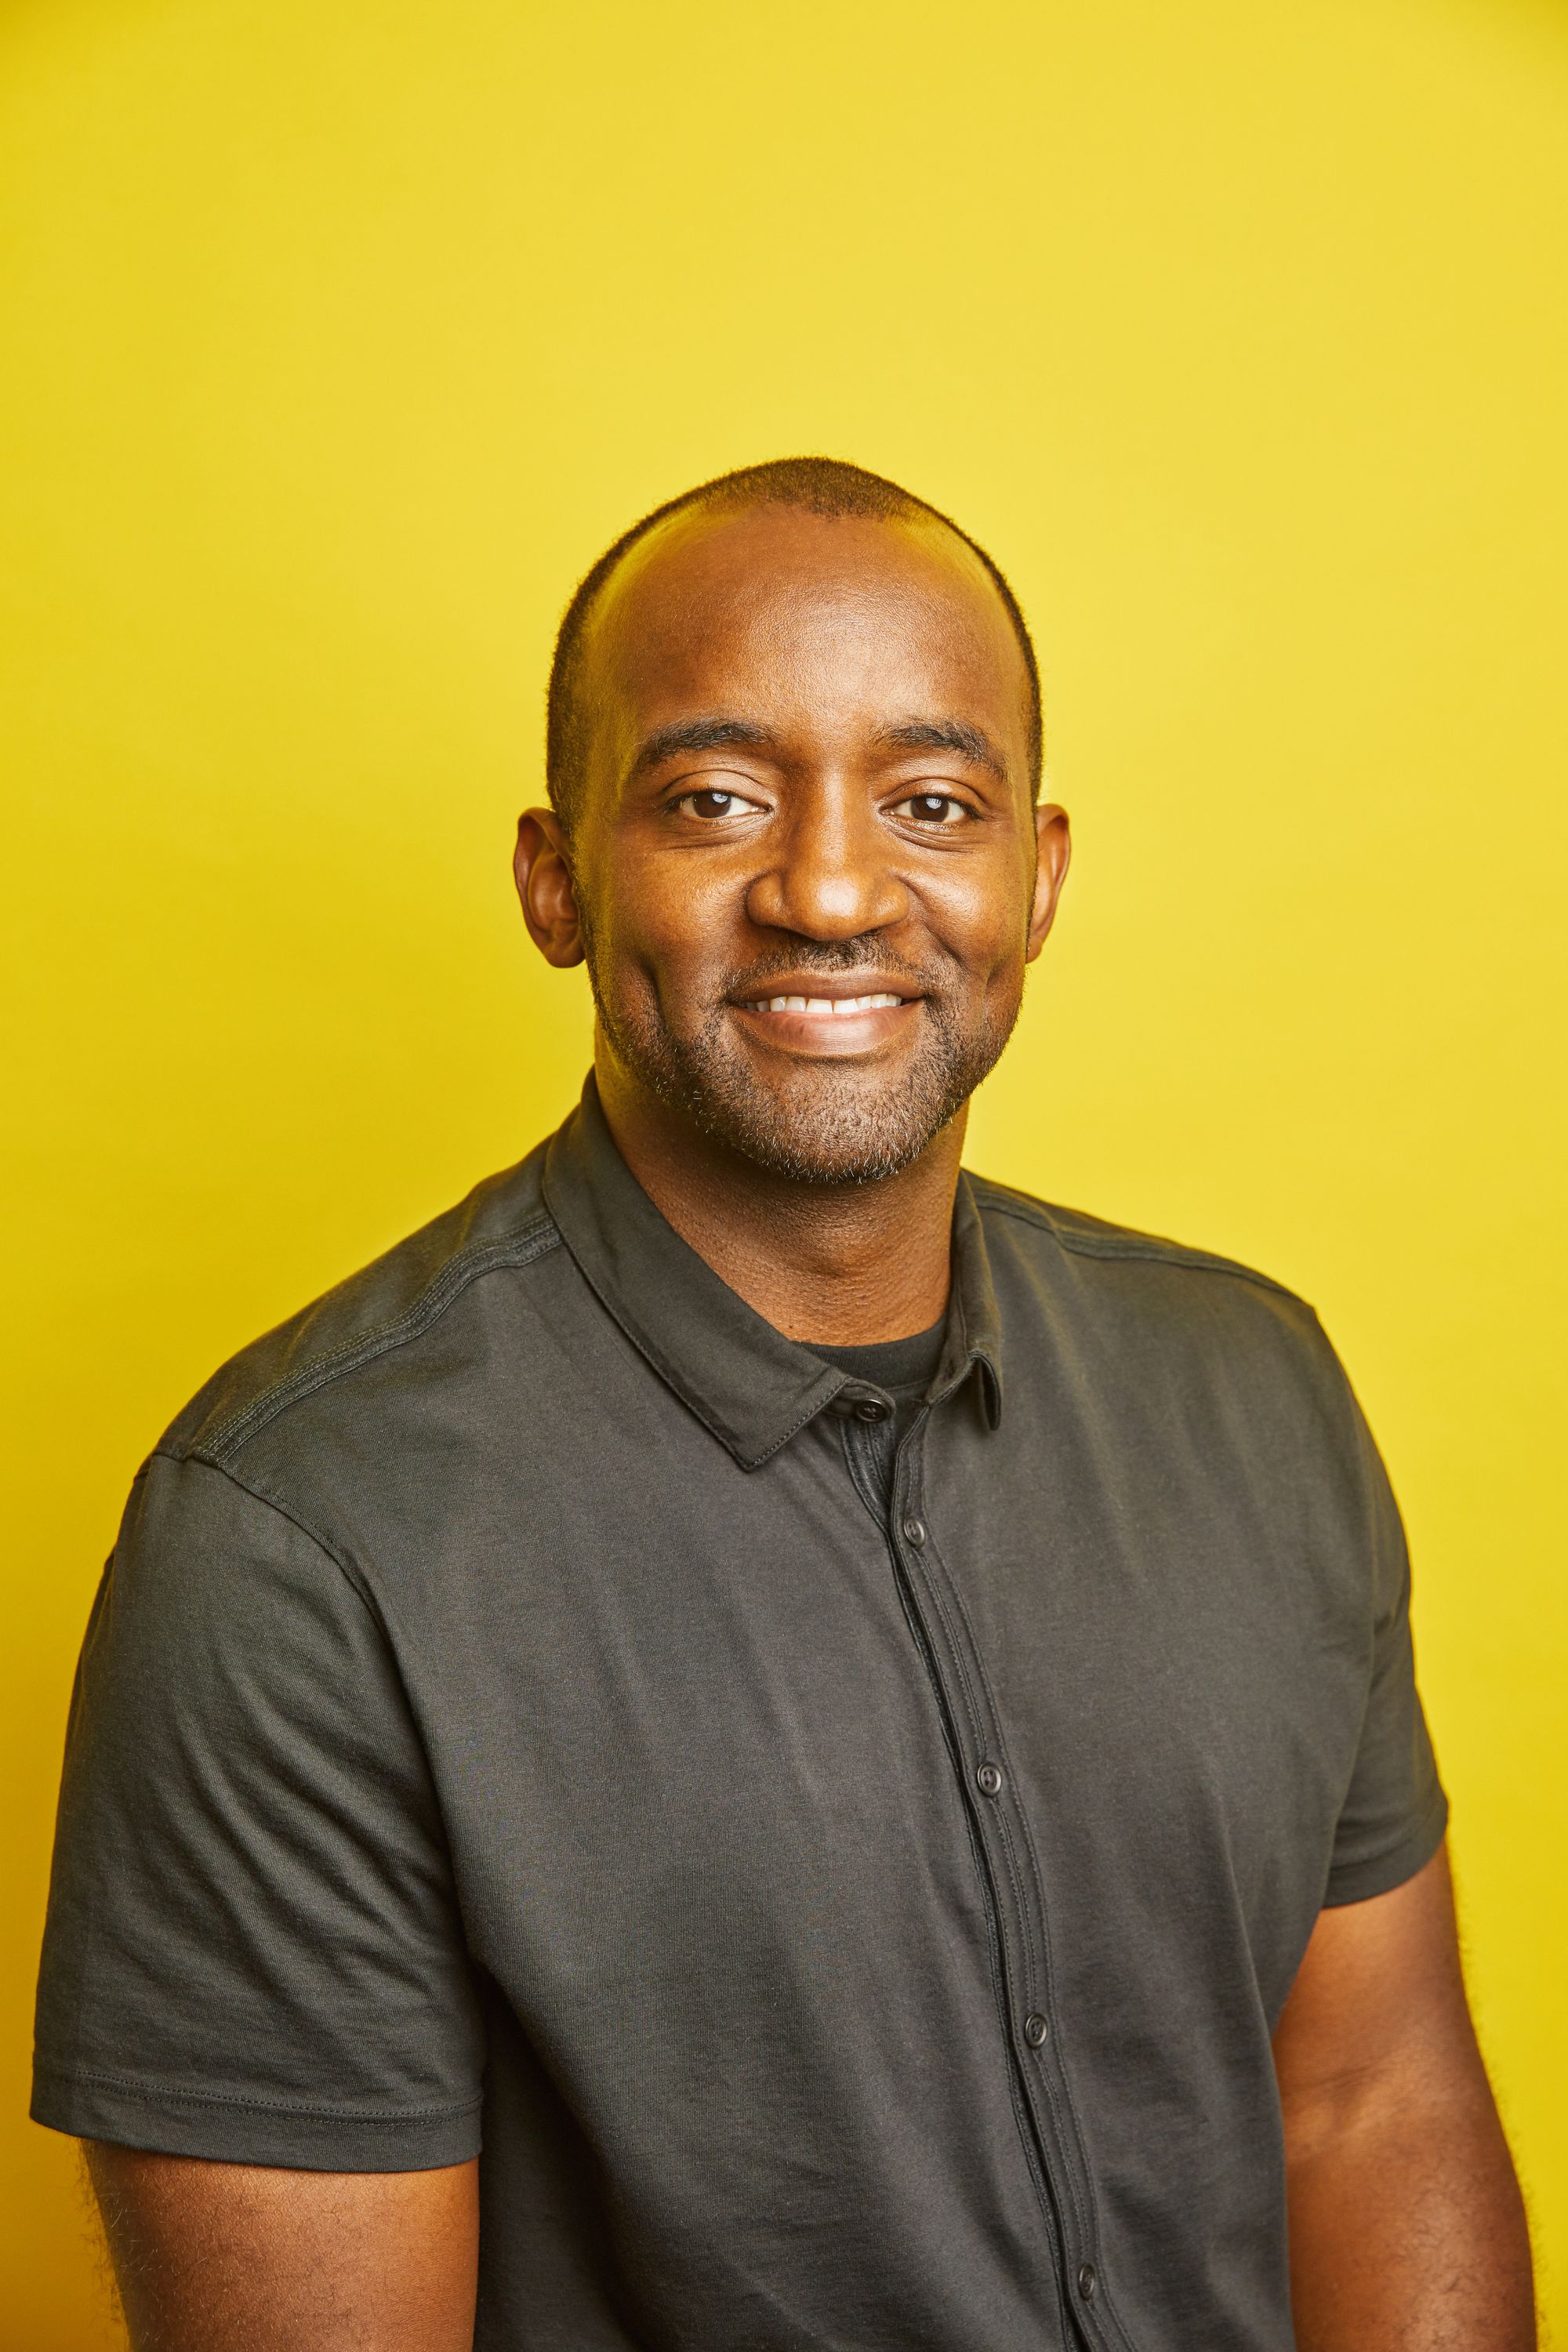 Kenny Mitchell, the CMO of Snap Inc., teaches marketing tips for entrepreneurs